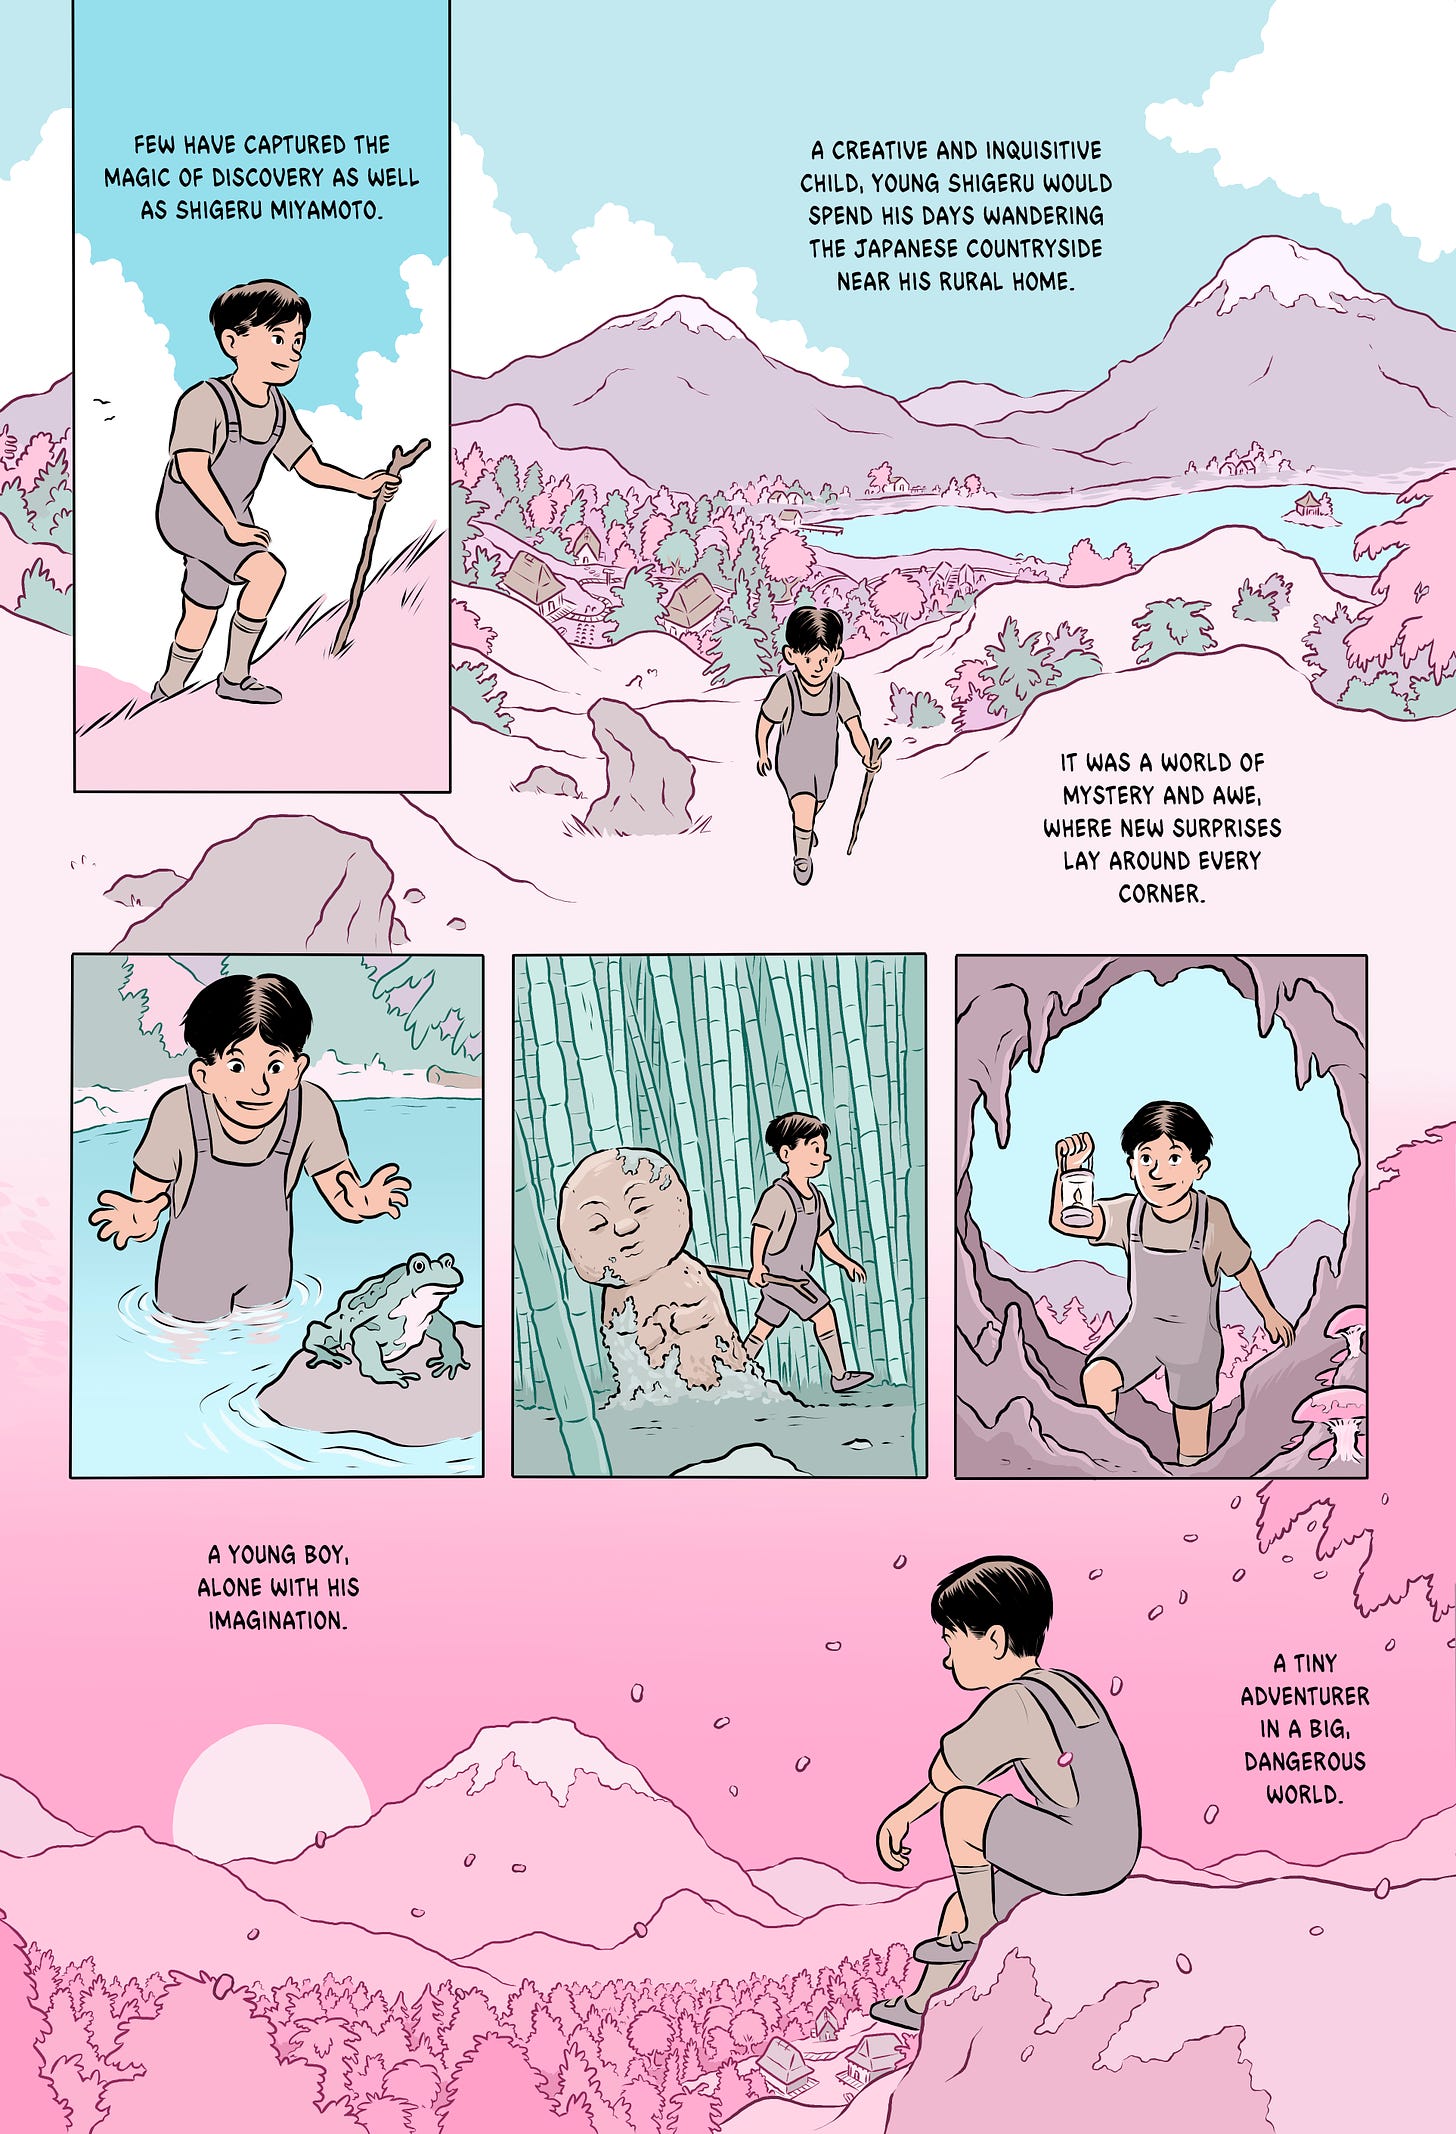 We see a young Japanese boy exploring the mountains, rivers and caves of a Japanese landscape. The final panels shows him resting on a hill watching a sunset. Text reads: Few have captured the magic of discovery as well as Shigeru Miyamoto.  A creative and inquisitive child, young Shigeru would spend his days wandering the Japanese countryside near his rural home.  It was a world of mystery and awe, where new surprises lay around every corner.   A young boy, alone with his imagination.  A tiny adventurer in a big, dangerous world.